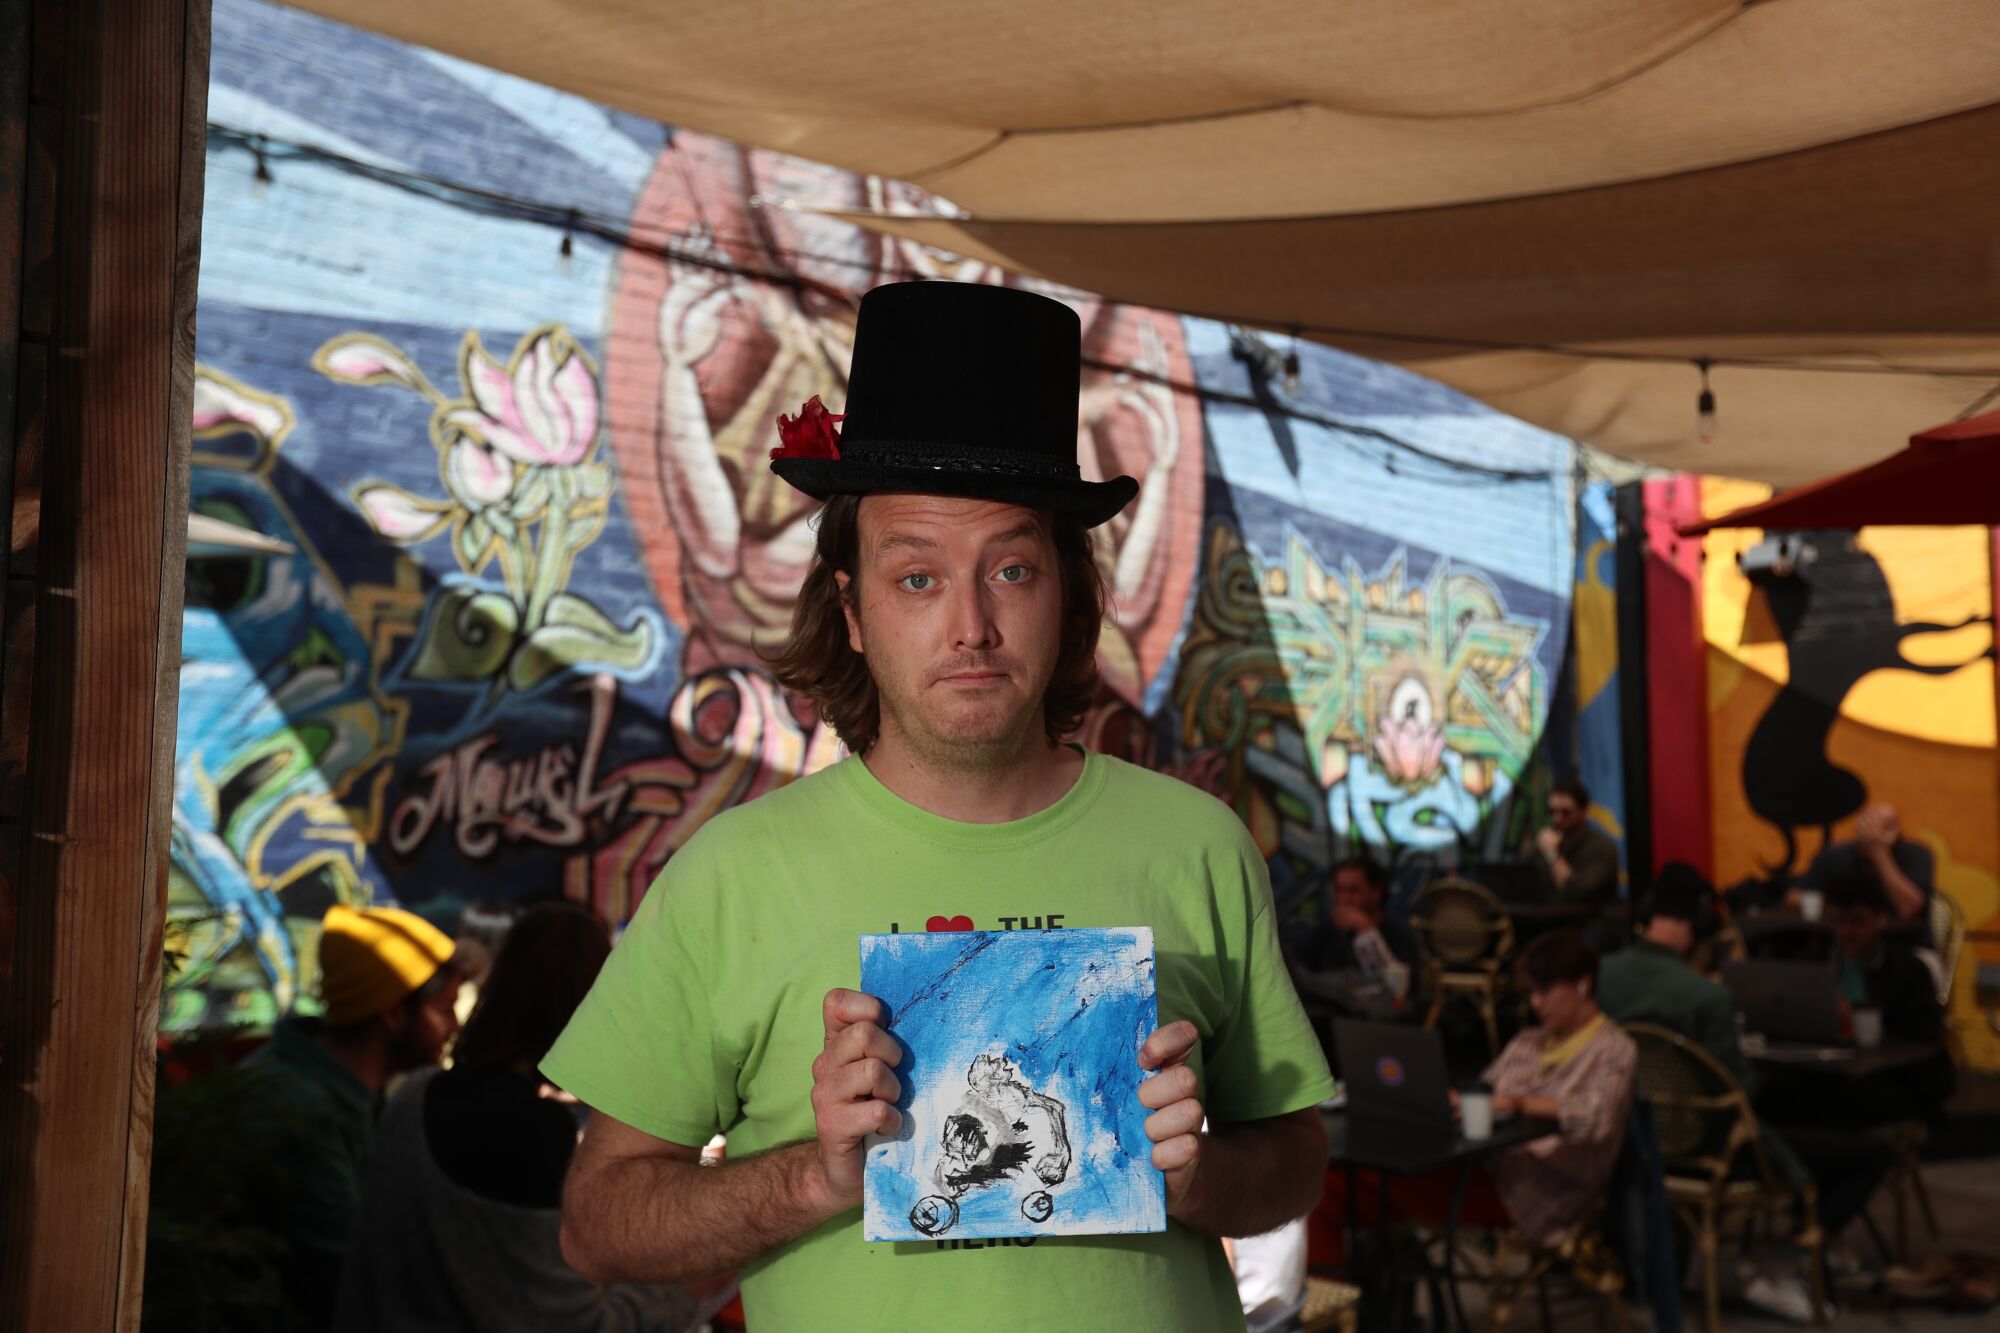 A man in a top hat and a neon green T-shirt holds a painting.